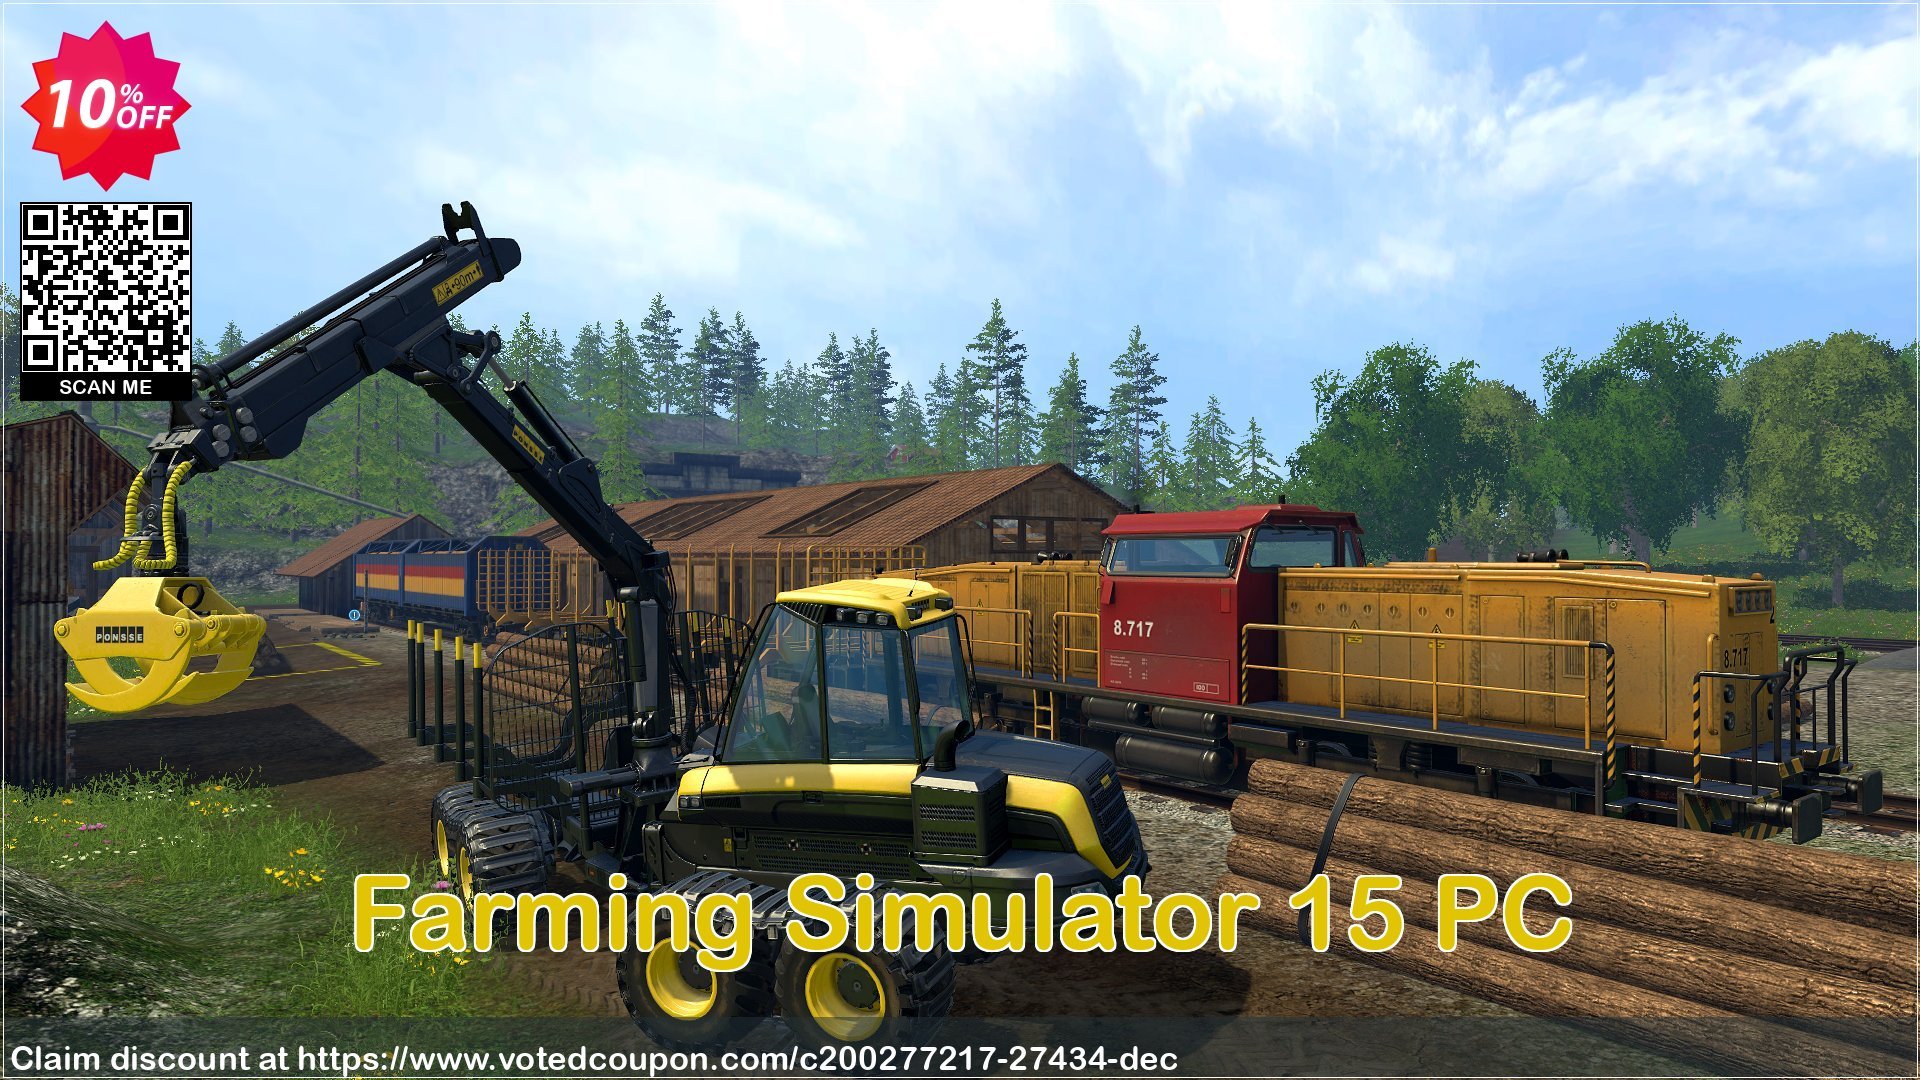 Farming Simulator 15 PC voted-on promotion codes